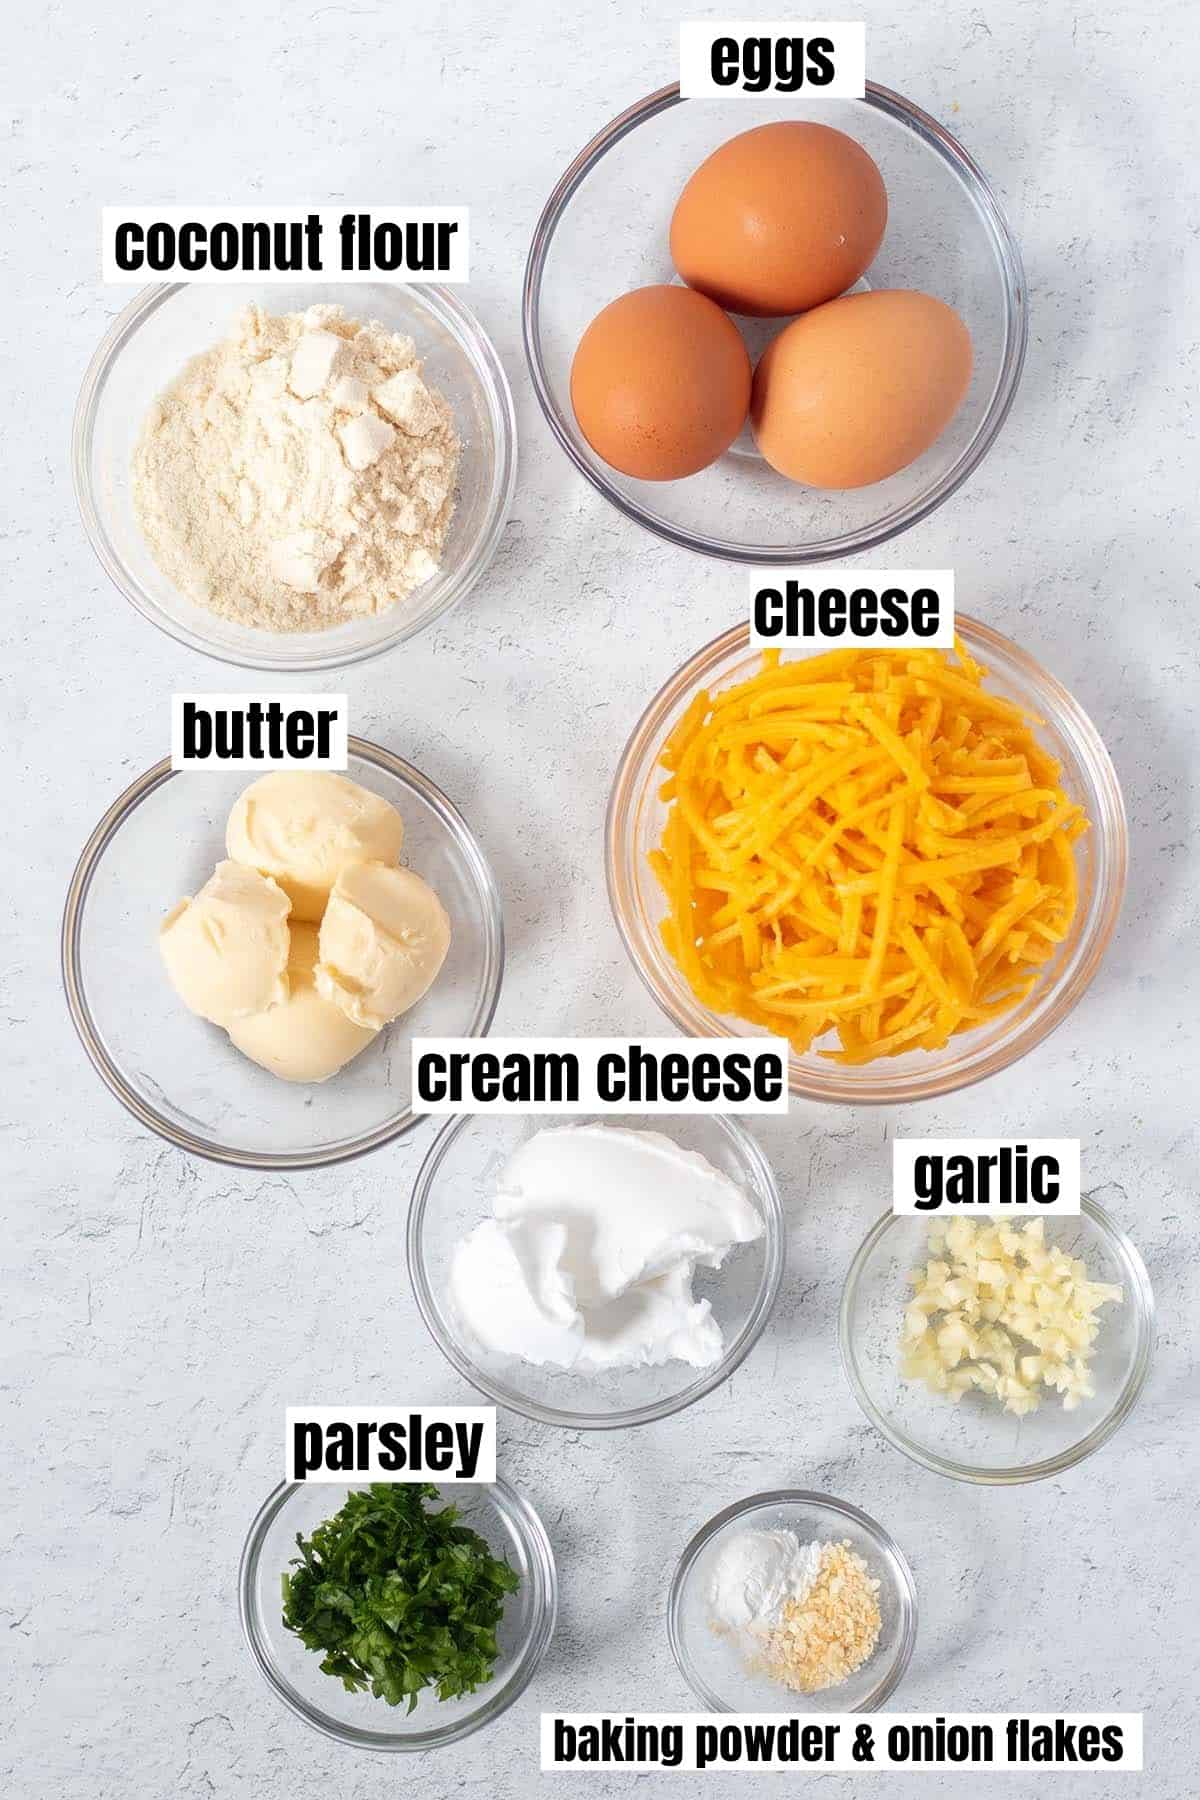 ingredients in cheesy coconut flour biscuits which include coconut flour, eggs, butter, cheese, cream cheese, garlic, parsley, baking powder & minced onion.